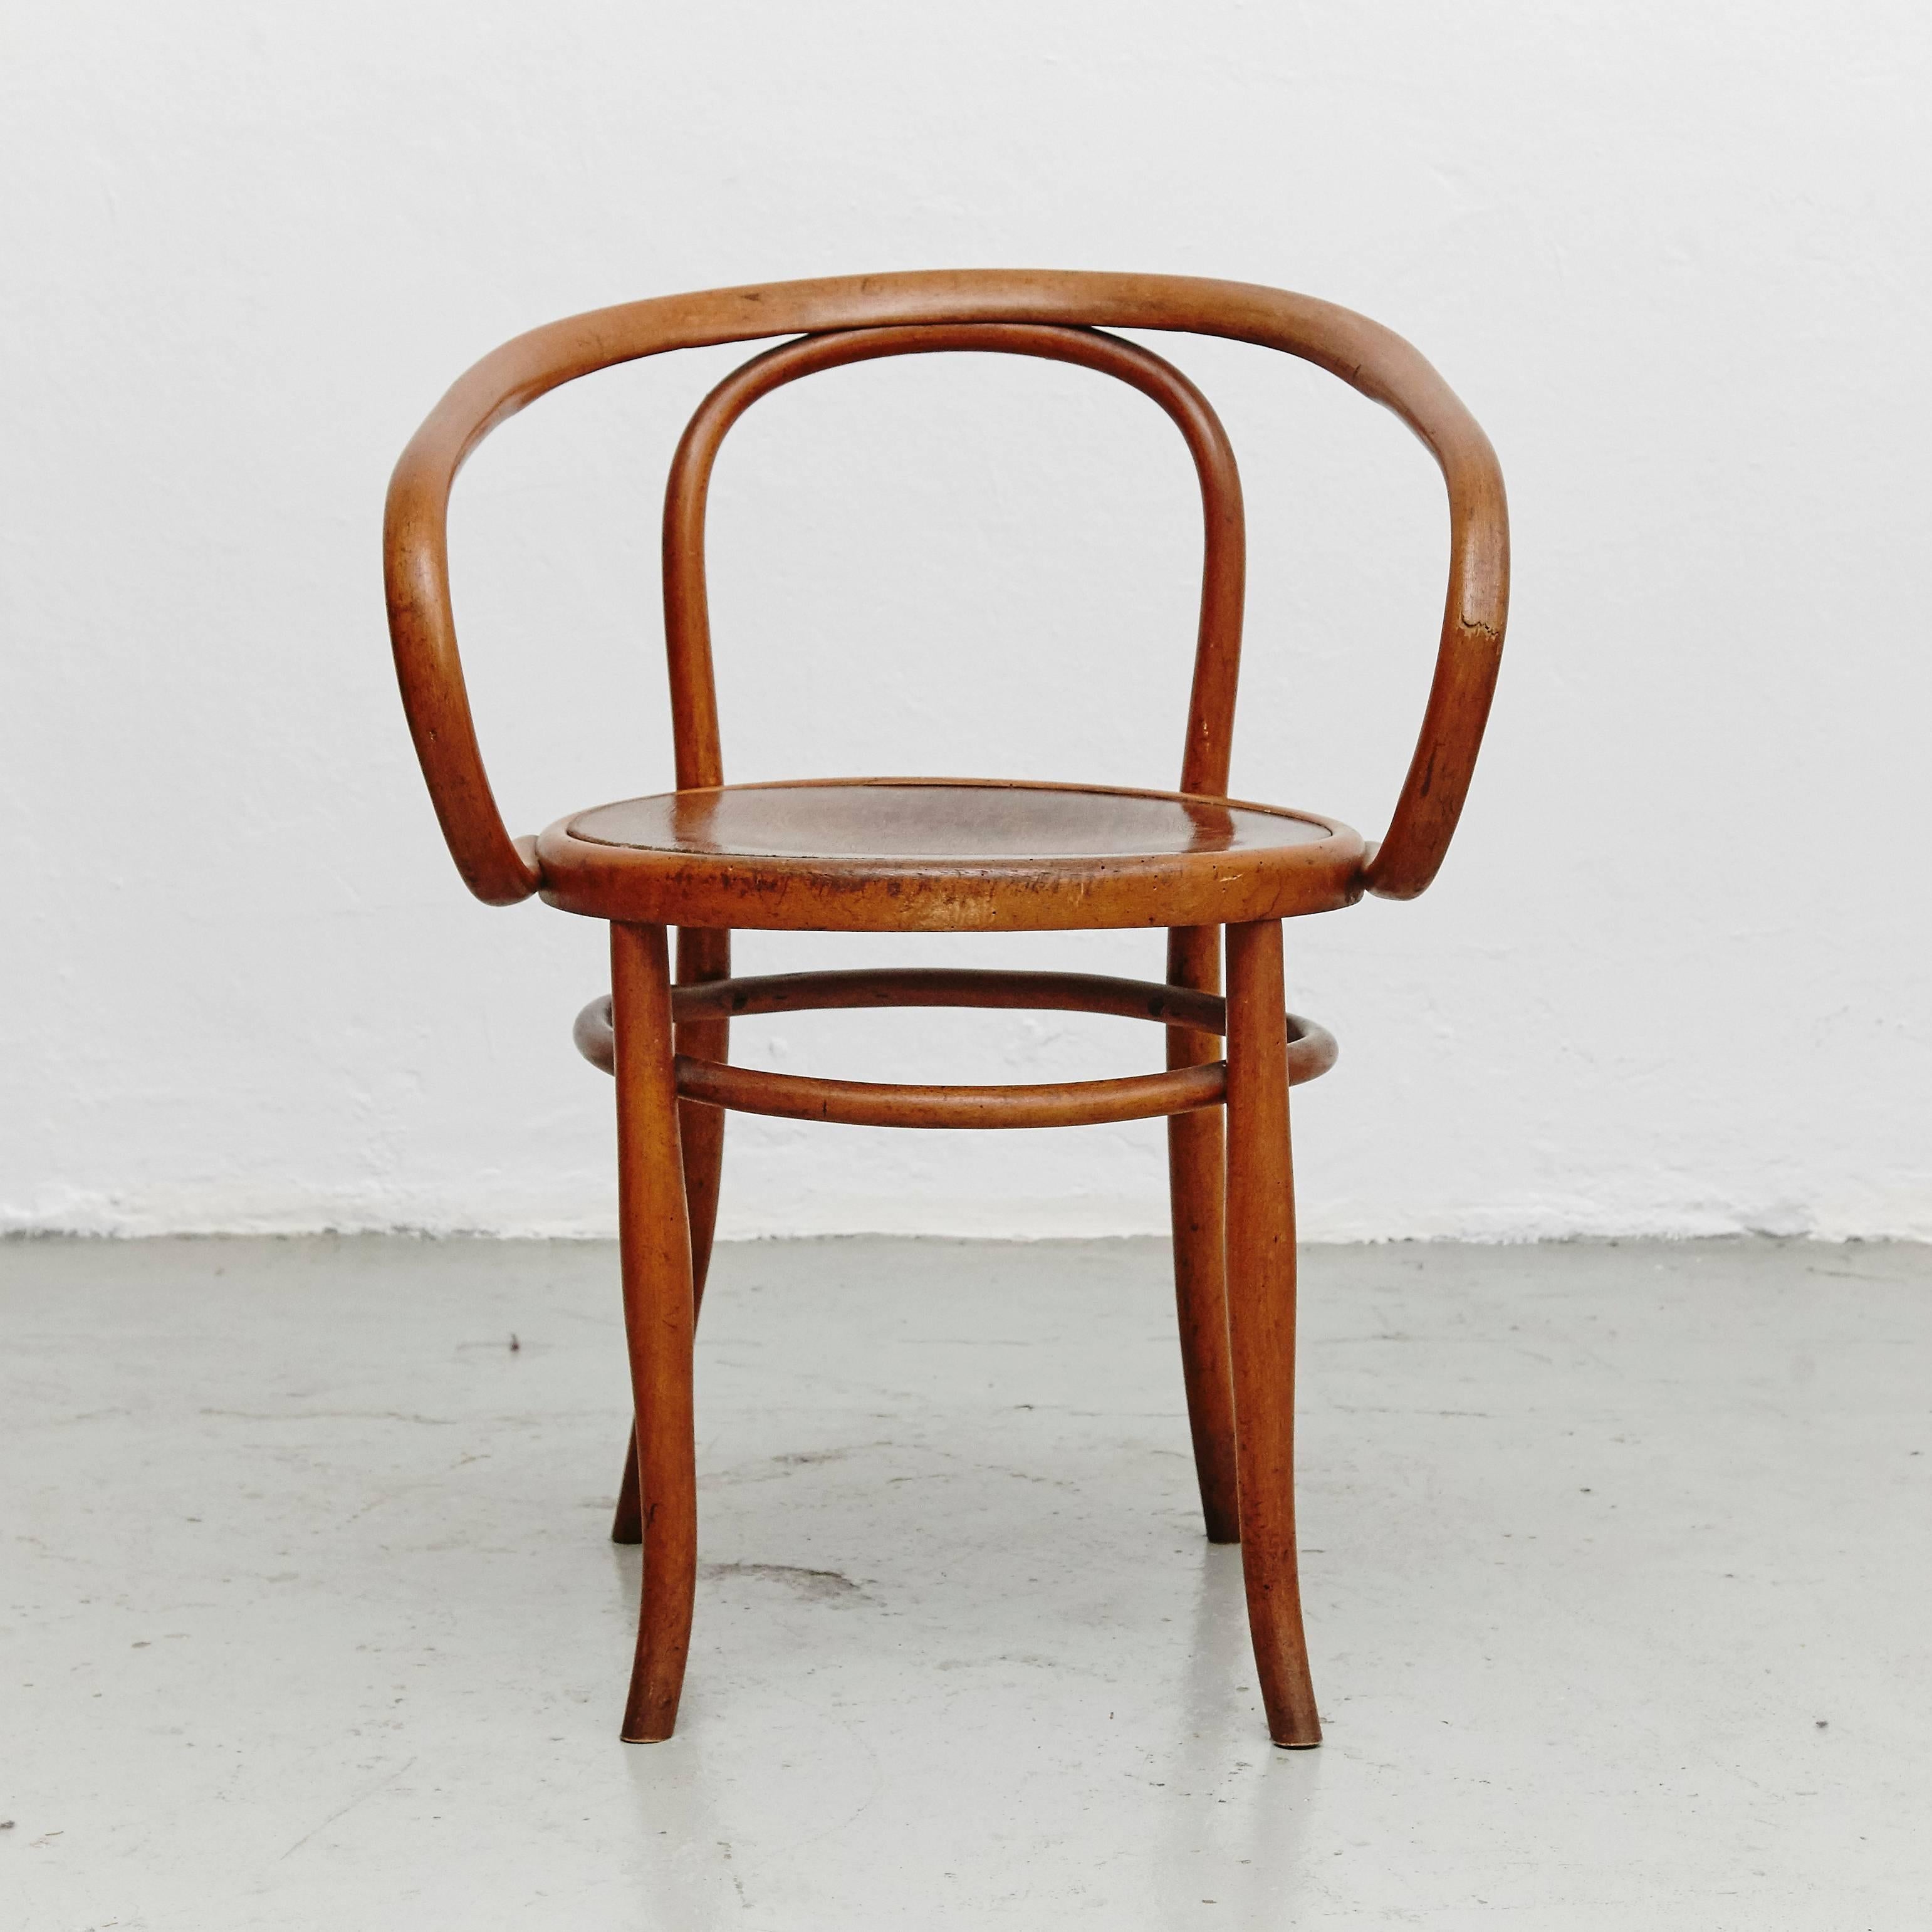 Thonet 209 by August Thonet for Thonet.

In good original condition, with minor wear consistent with age and use, preserving a beautiful patina.

In the 1830s, Thonet began trying to make furniture out of glued and bent wooden slats. His first